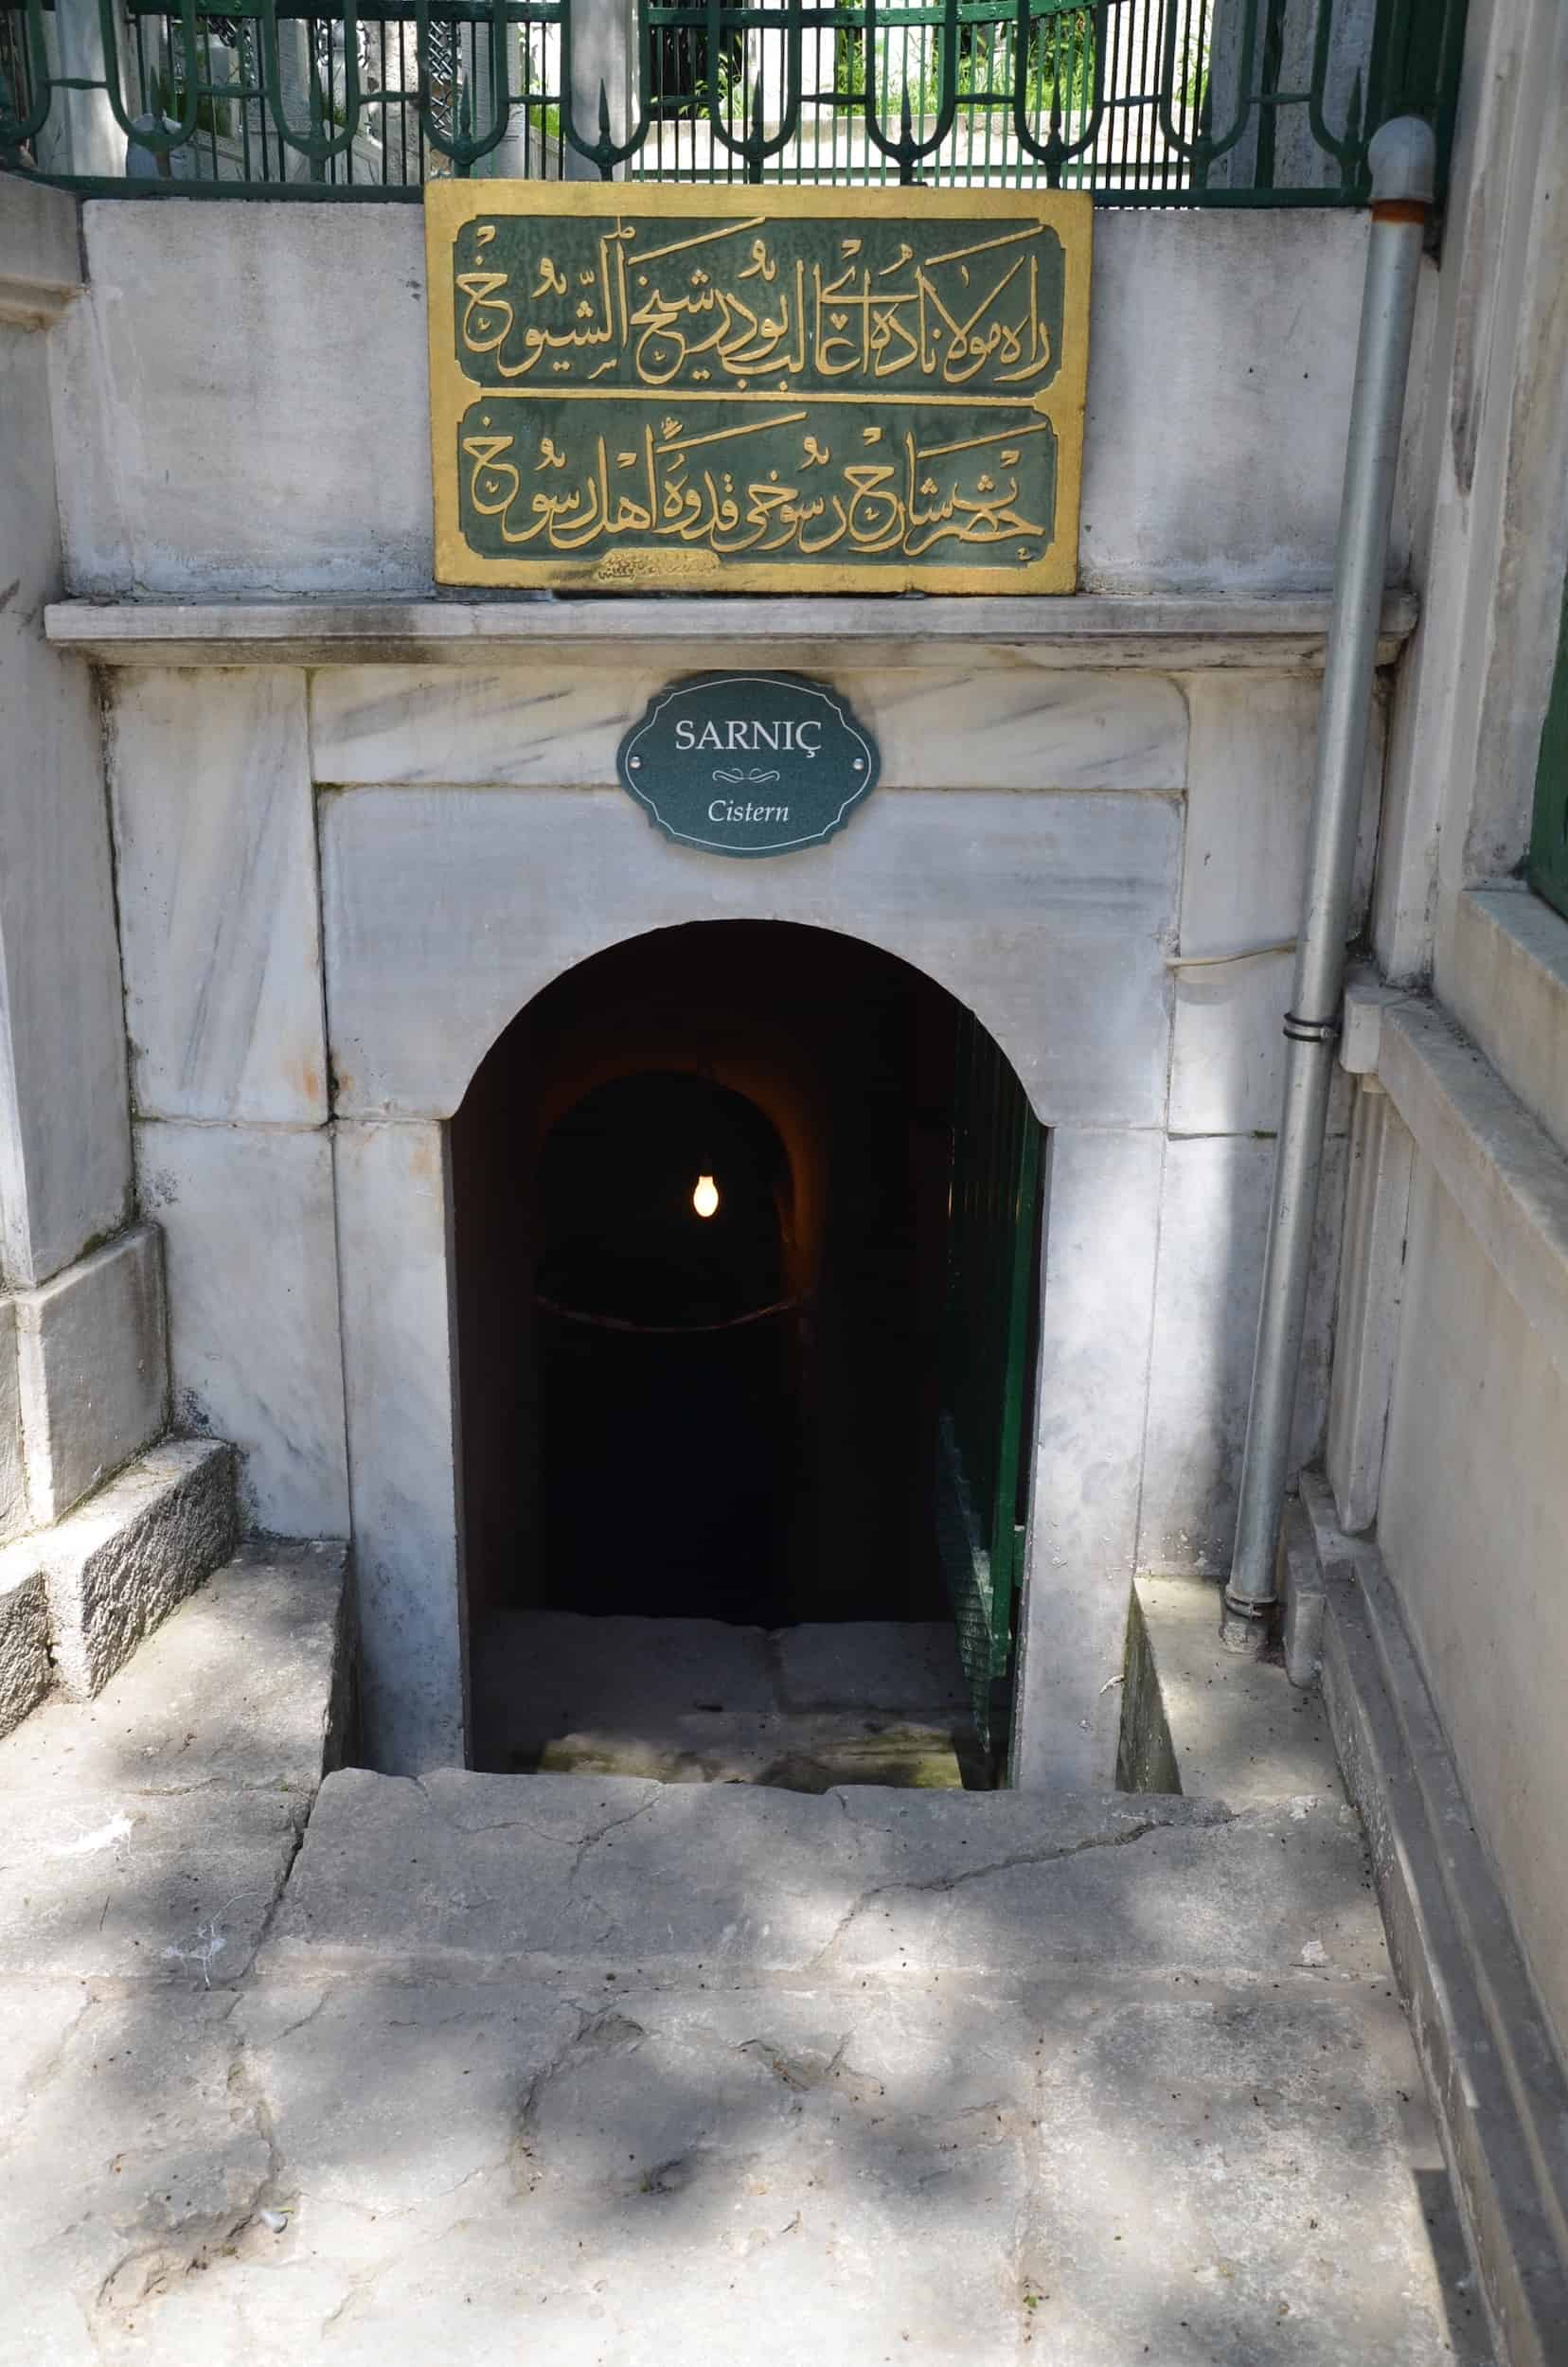 Entrance to the Byzantine cistern at the Galata Mevlevi Lodge Museum in Istanbul, Turkey